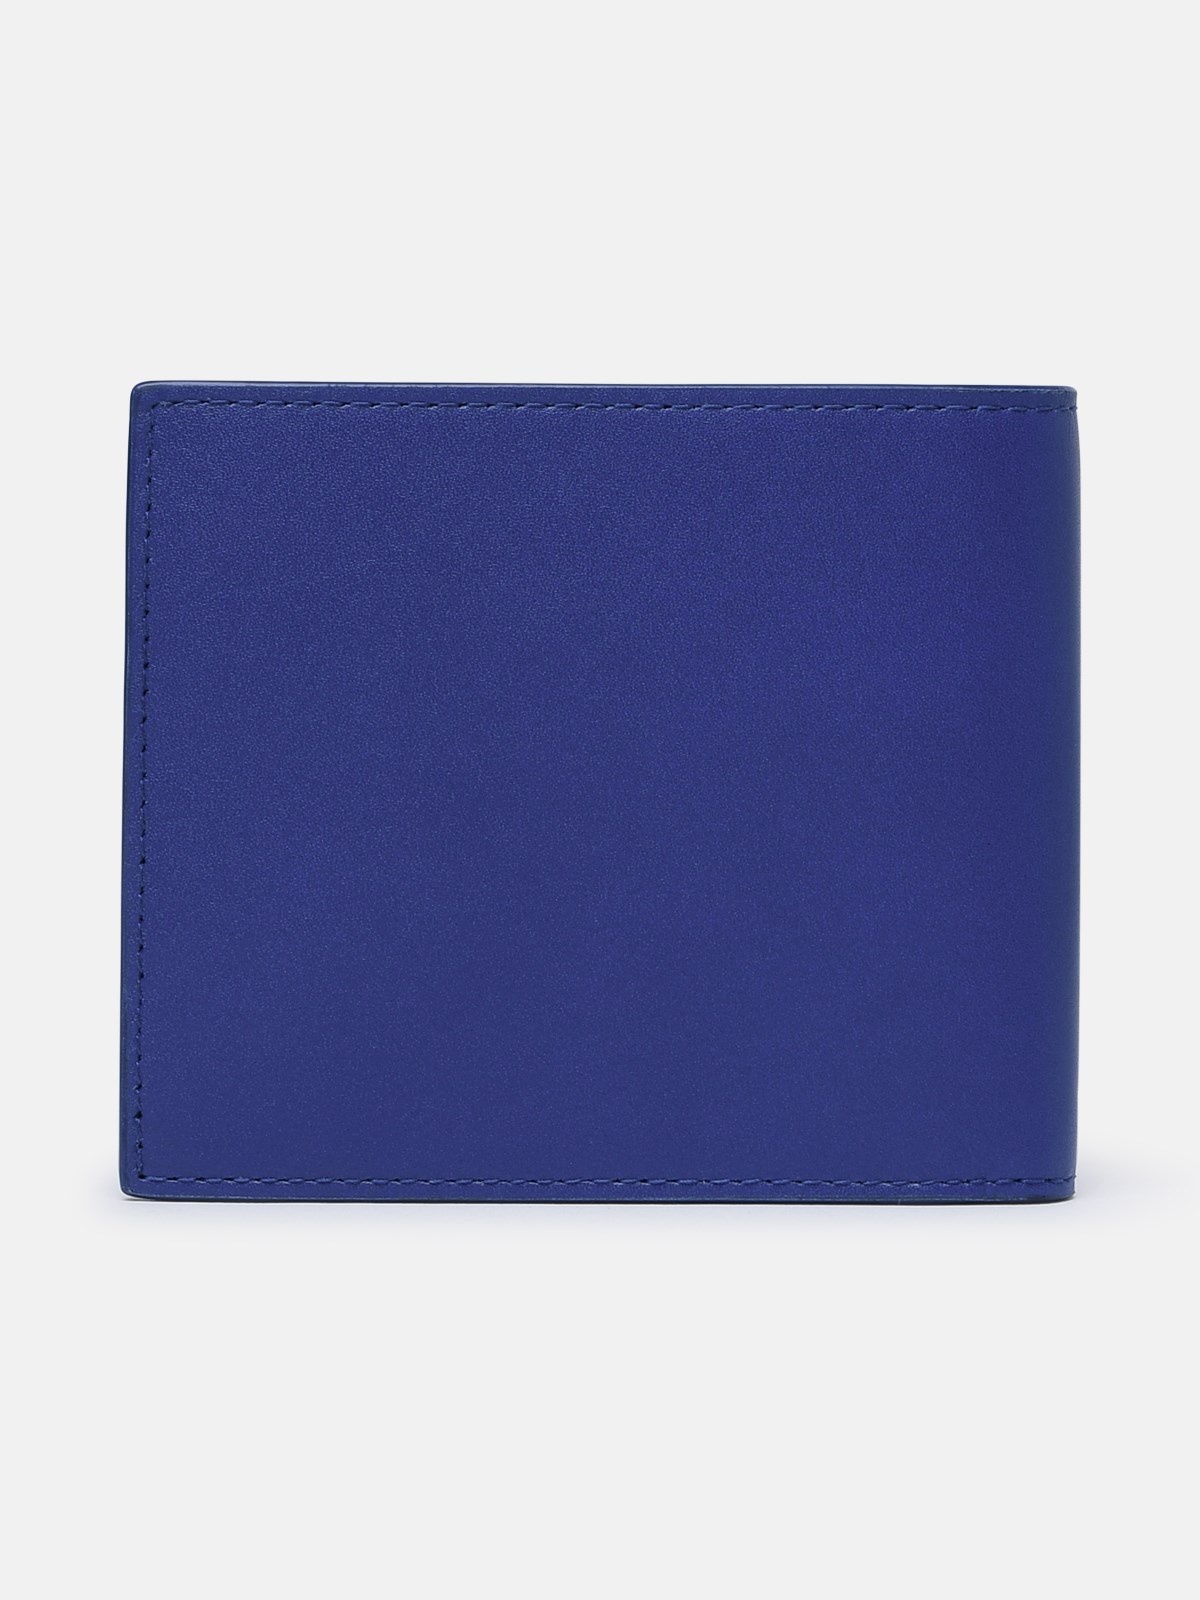 BLUE CALF LEATHER WALLET - 3